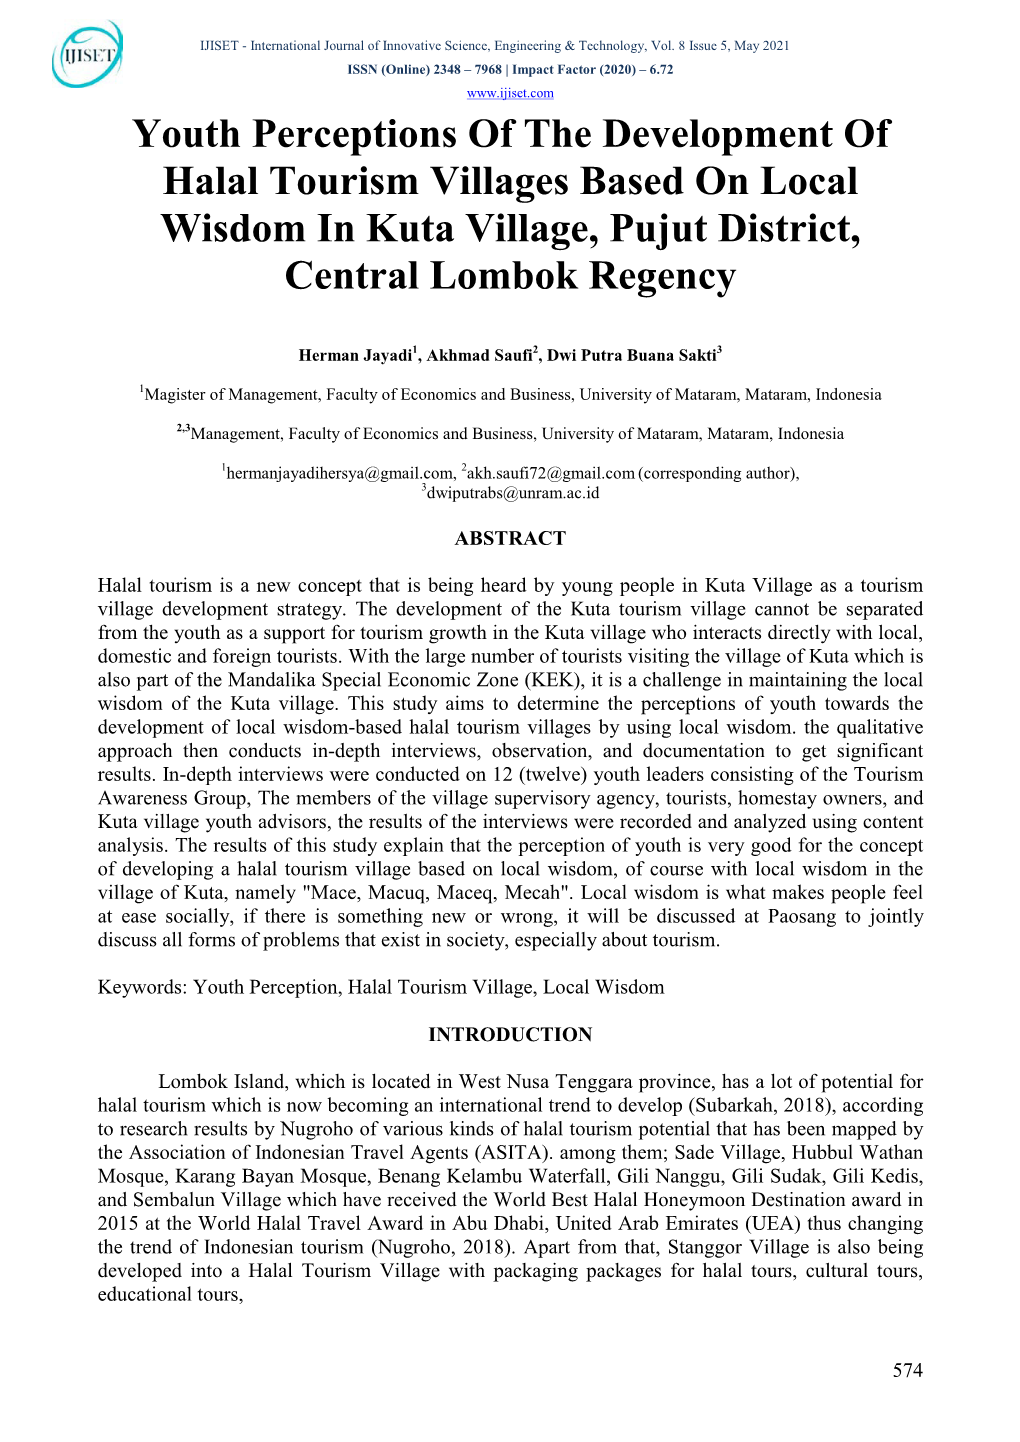 Youth Perceptions of the Development of Halal Tourism Villages Based on Local Wisdom in Kuta Village, Pujut District, Central Lombok Regency